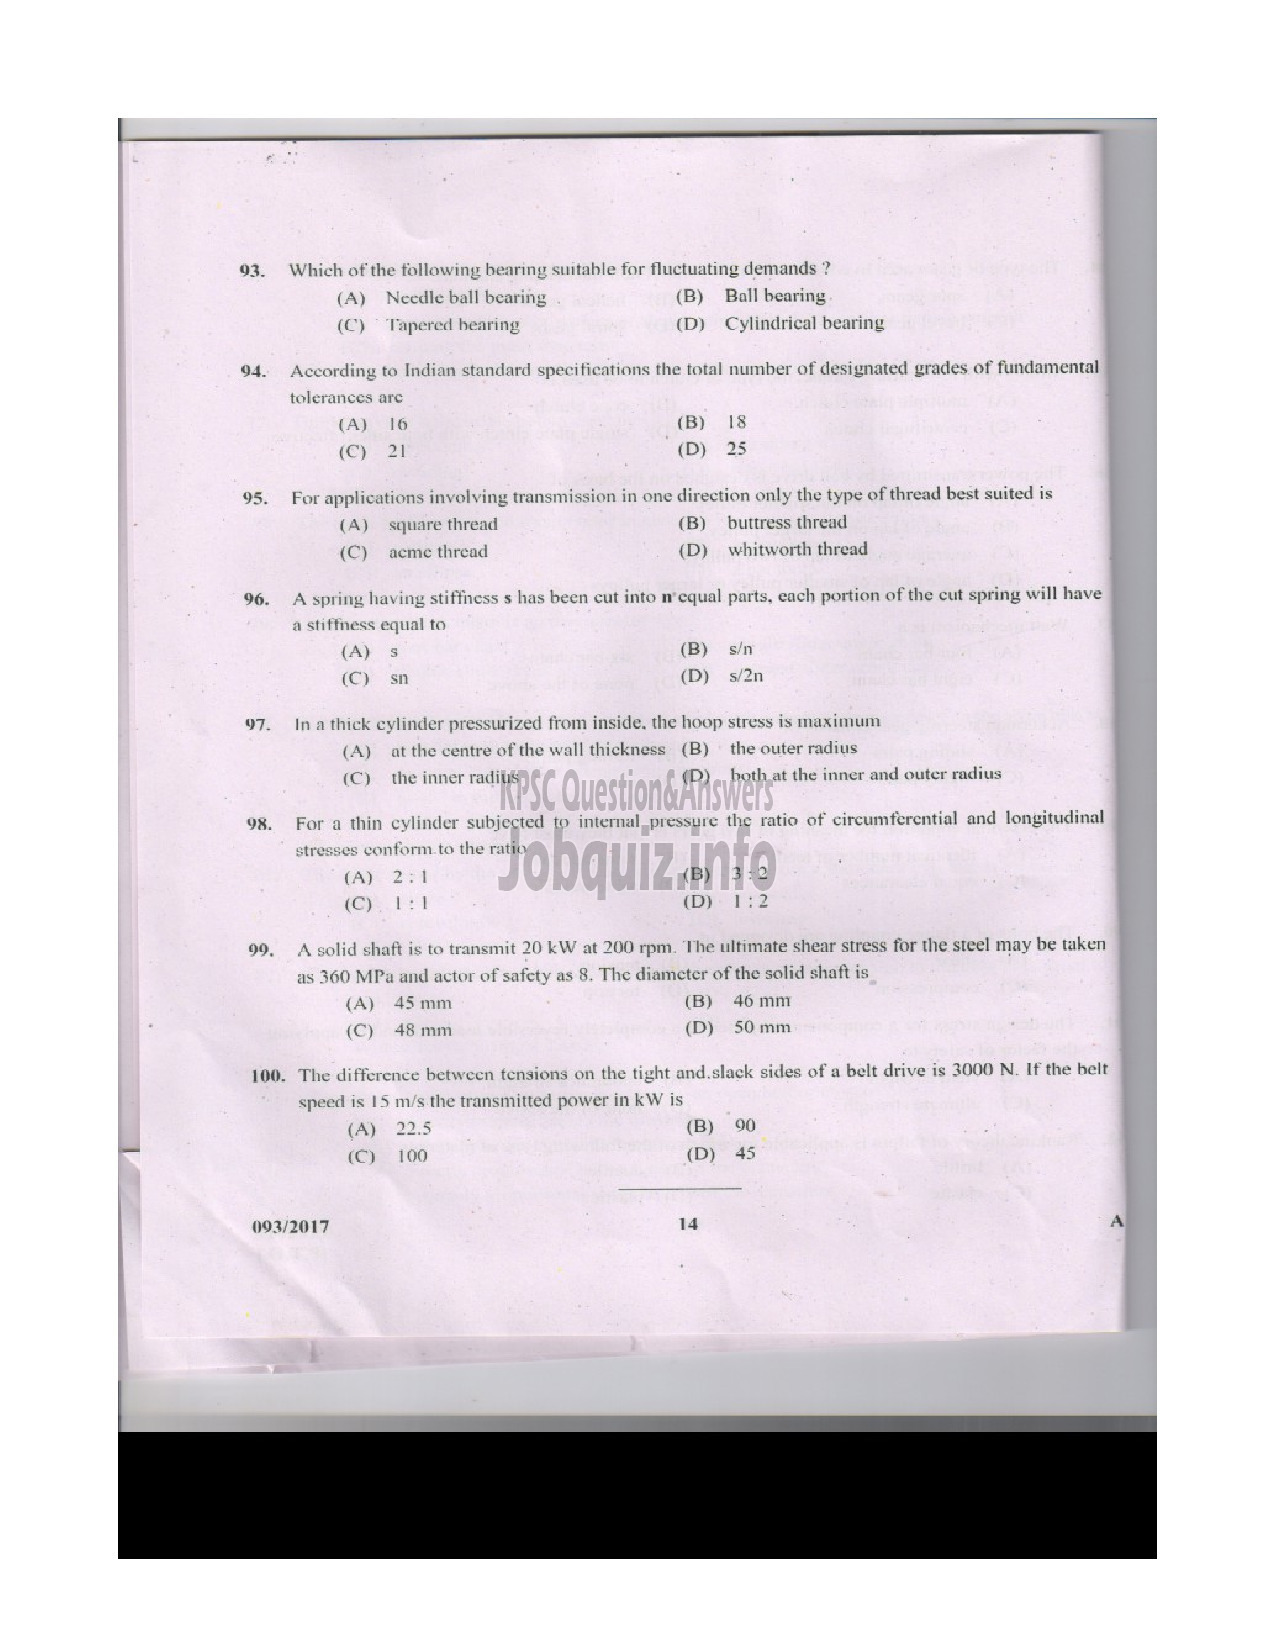 Kerala PSC Question Paper - INSTRUCTOR GRADE I MECHANICAL ENGINEERING ENGINEERING COLLEGES-13